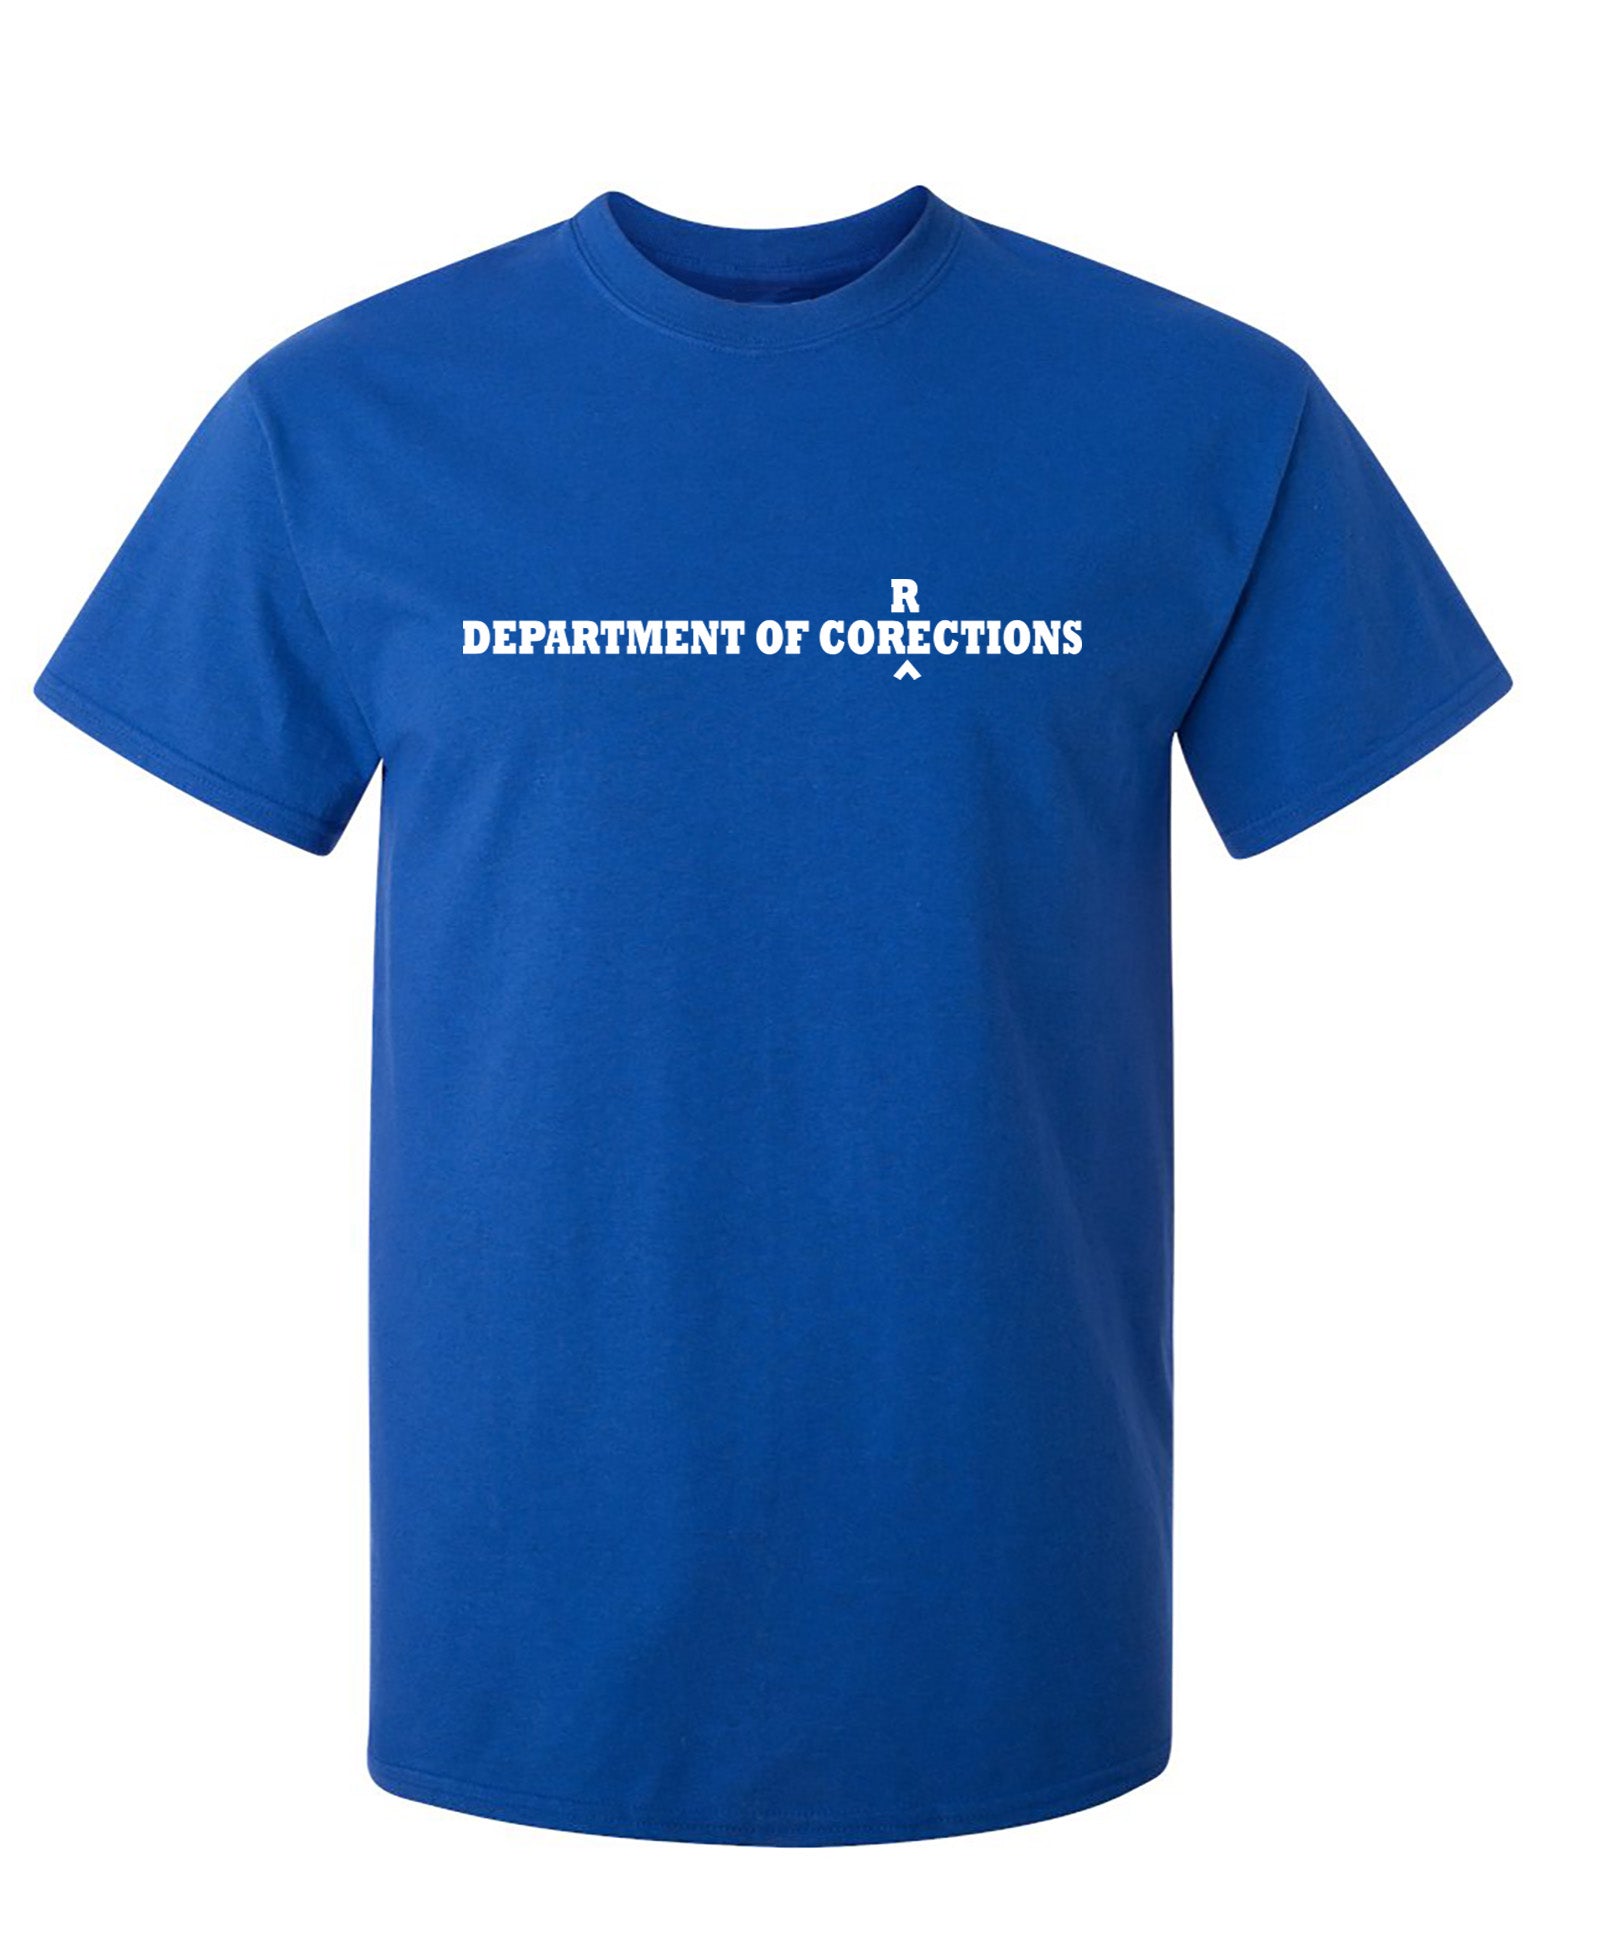 Department of Corrections - Funny T Shirts & Graphic Tees